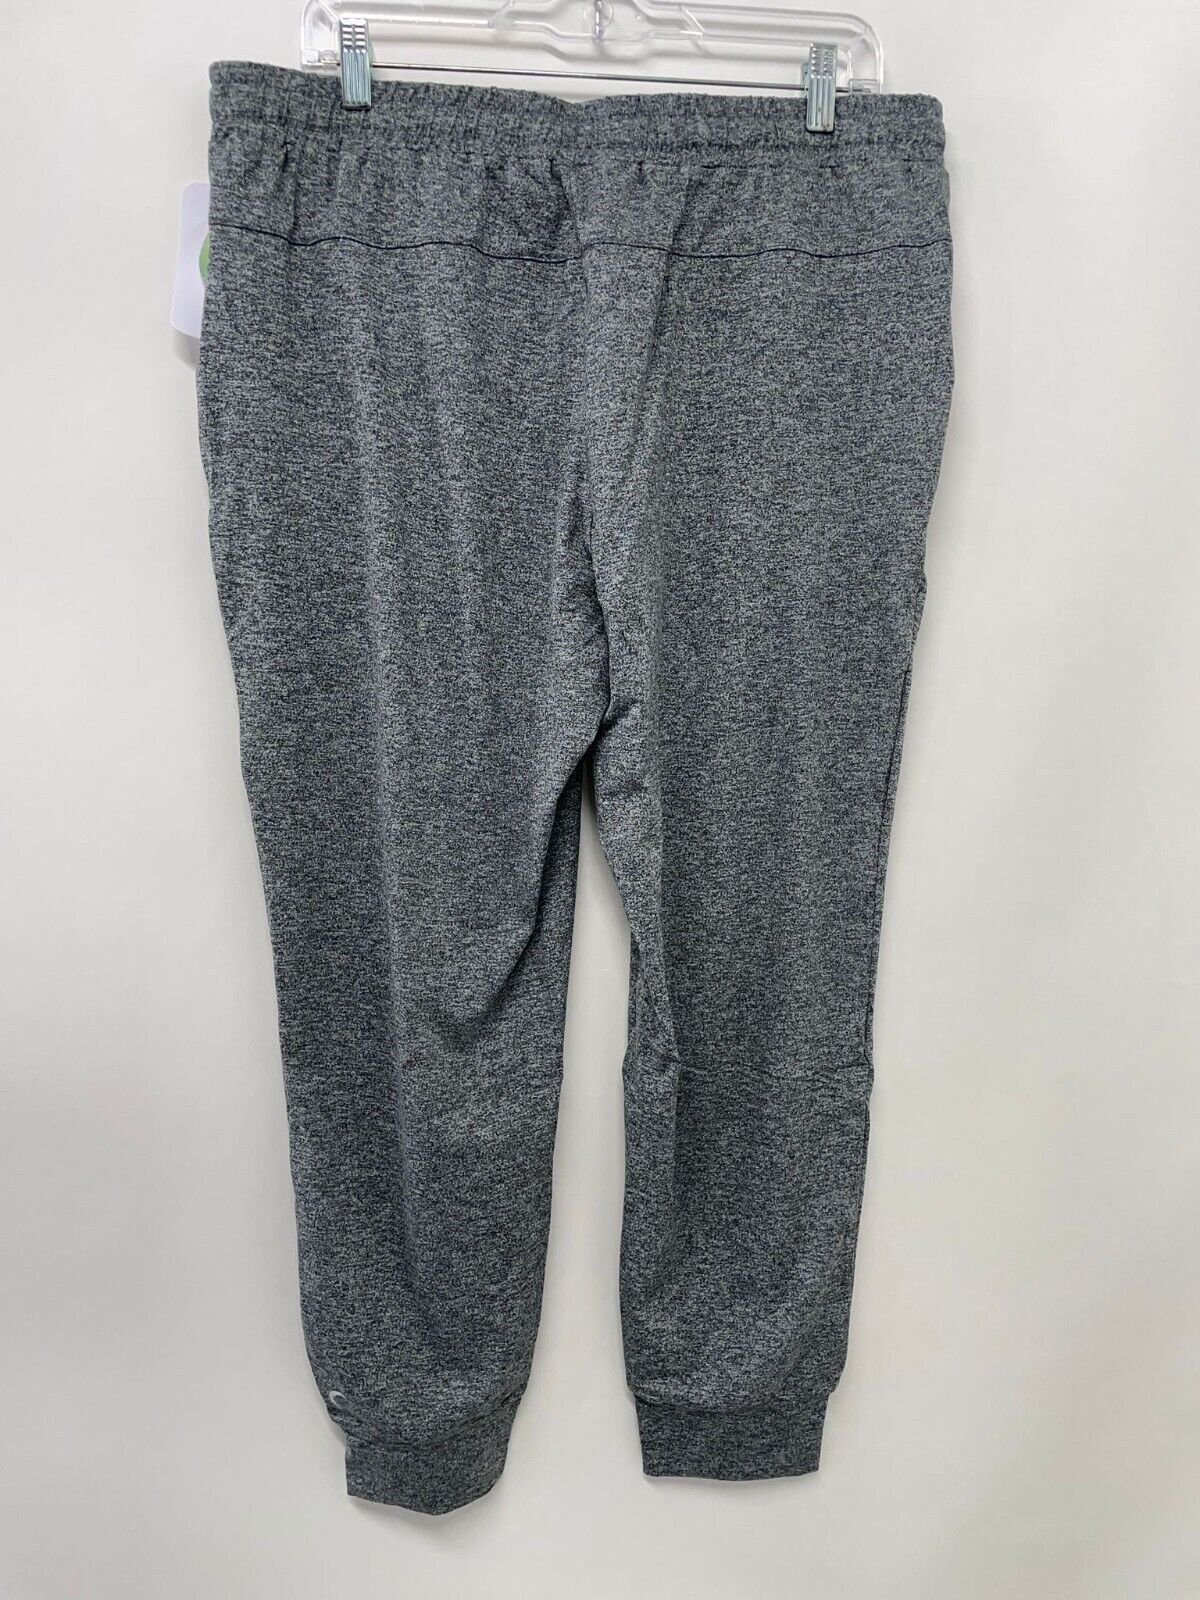 Zyia Active Womens XL Downtime Jogger Pants Heather Charcoal Gray Drawstring